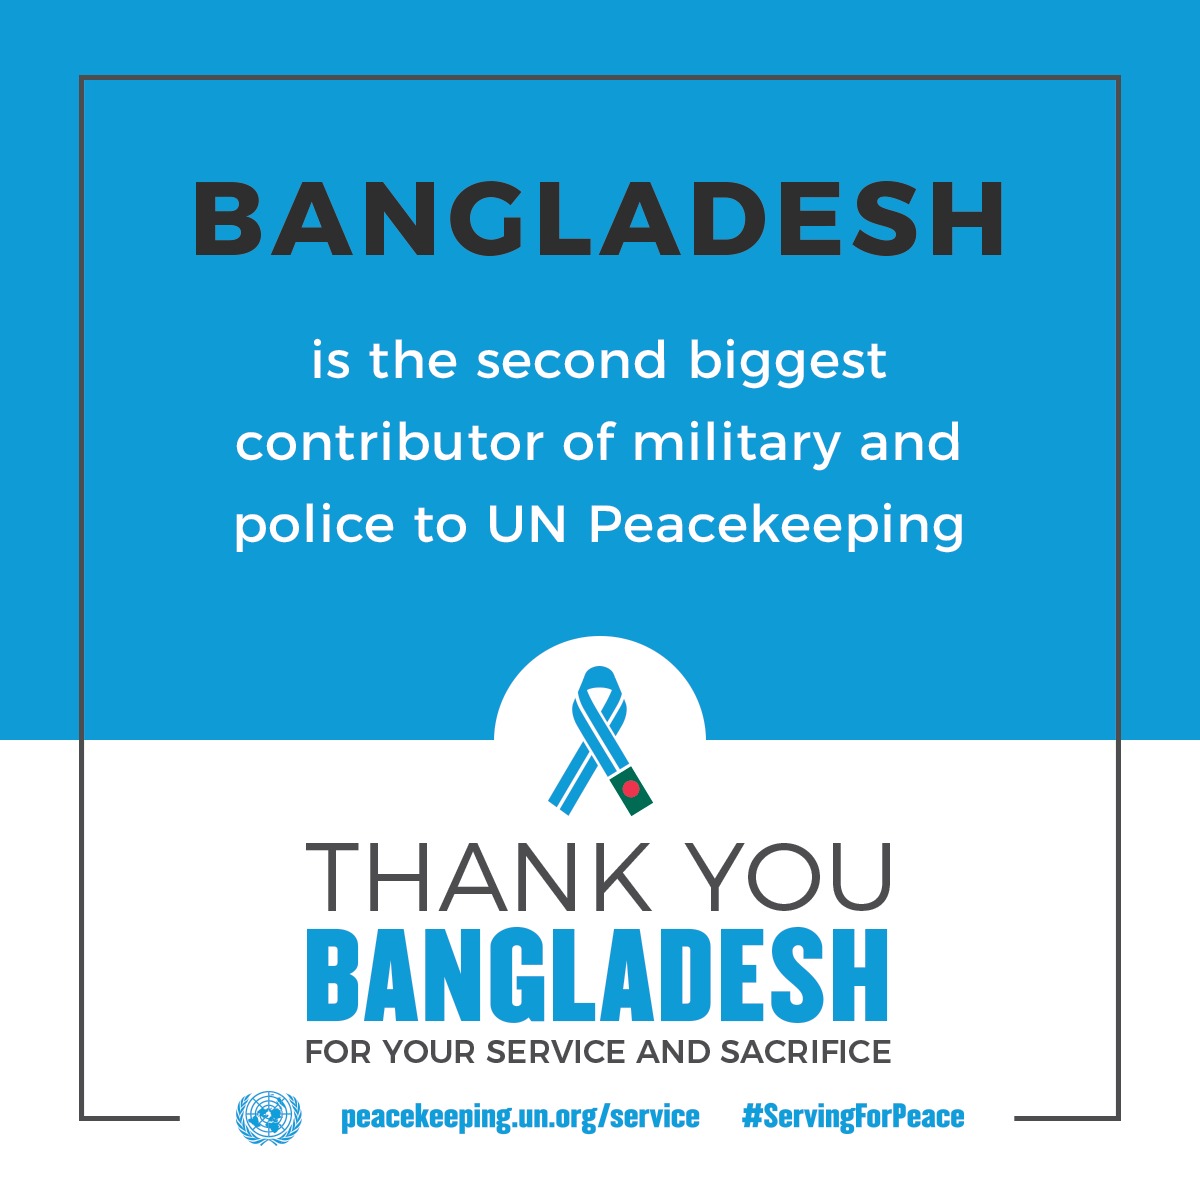 Bangladesh is the second biggest contributor of military and police